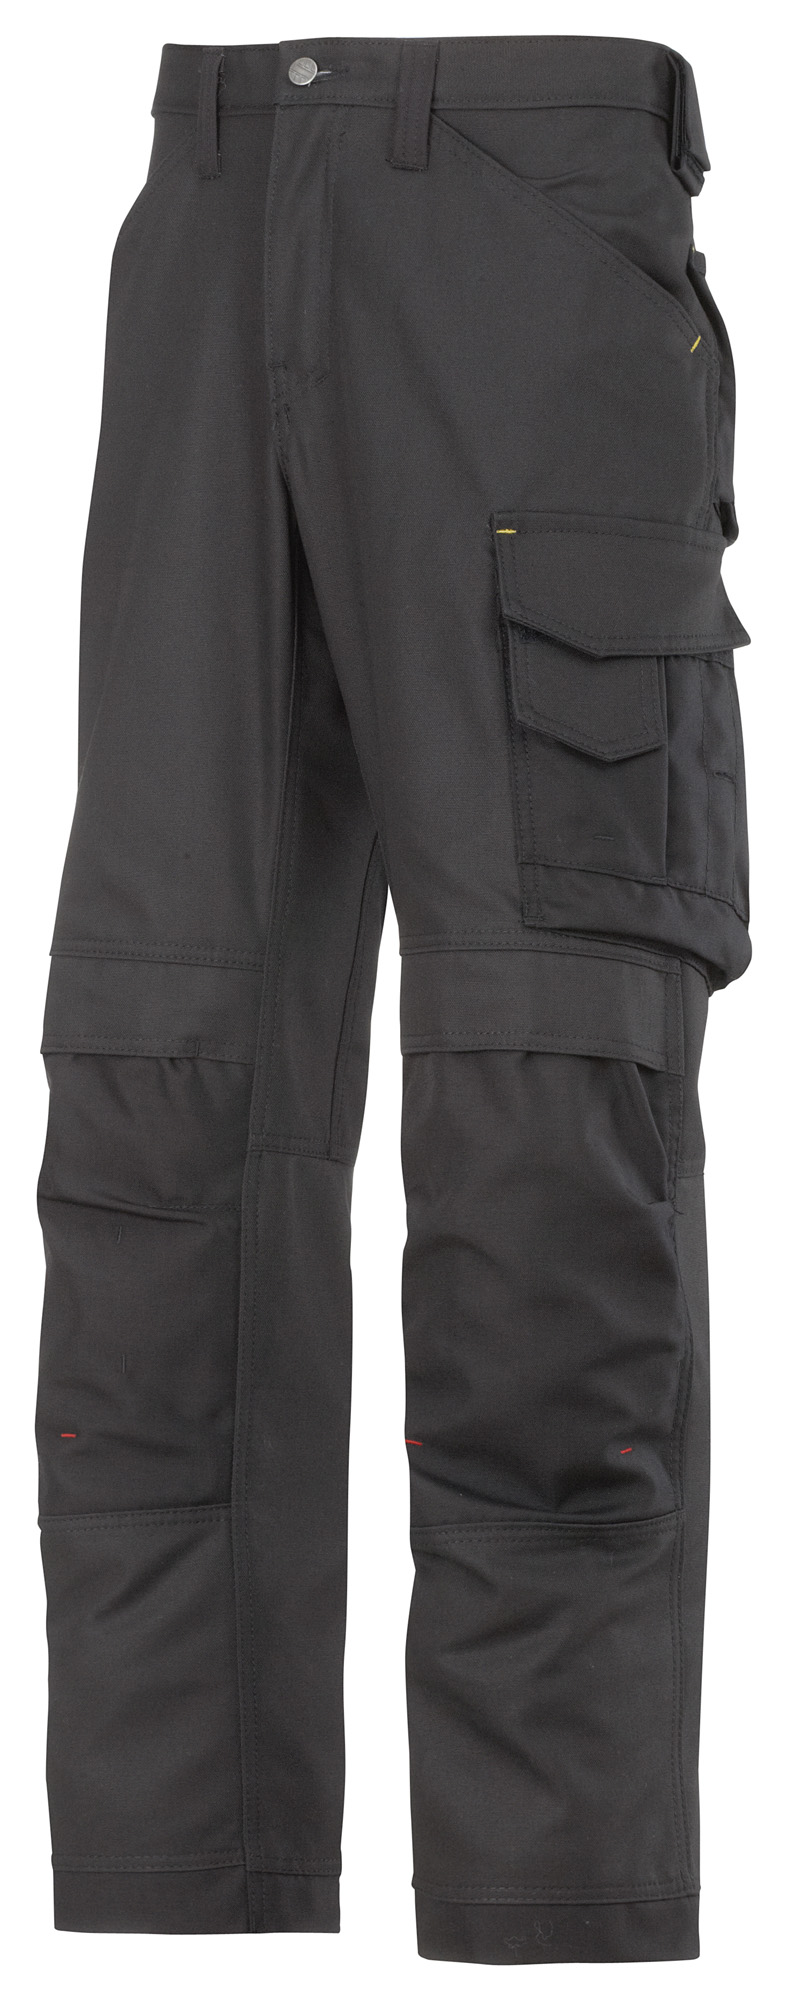 Snickers Work Trousers with Kneepad Pockets Canvas Plus-3314 | eBay